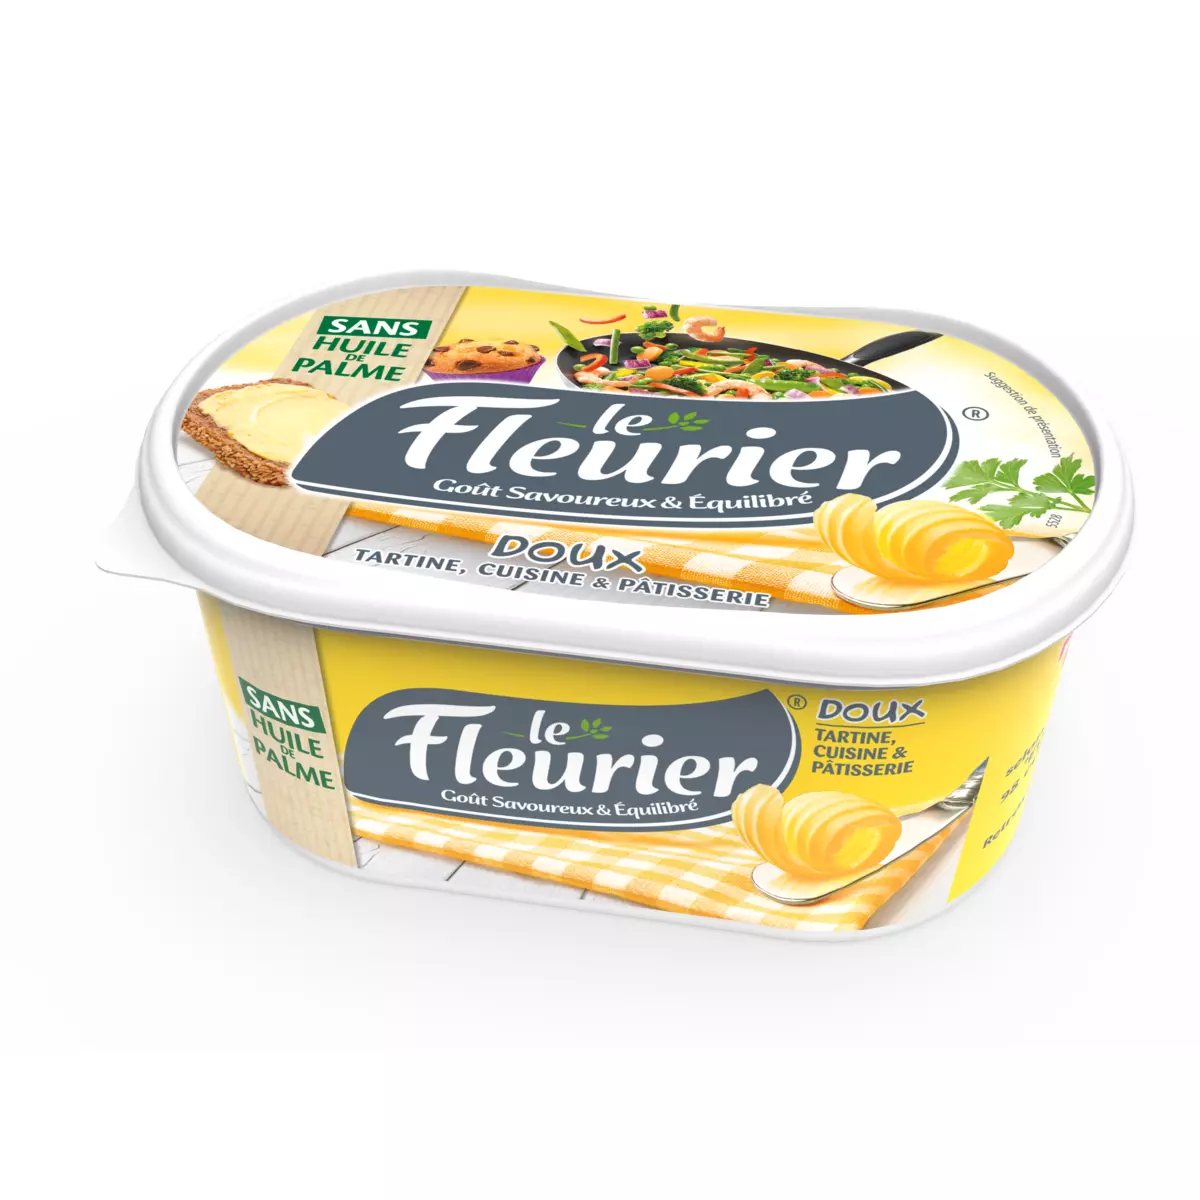 Le Fleurier Margarine Toast & Cooking 500g